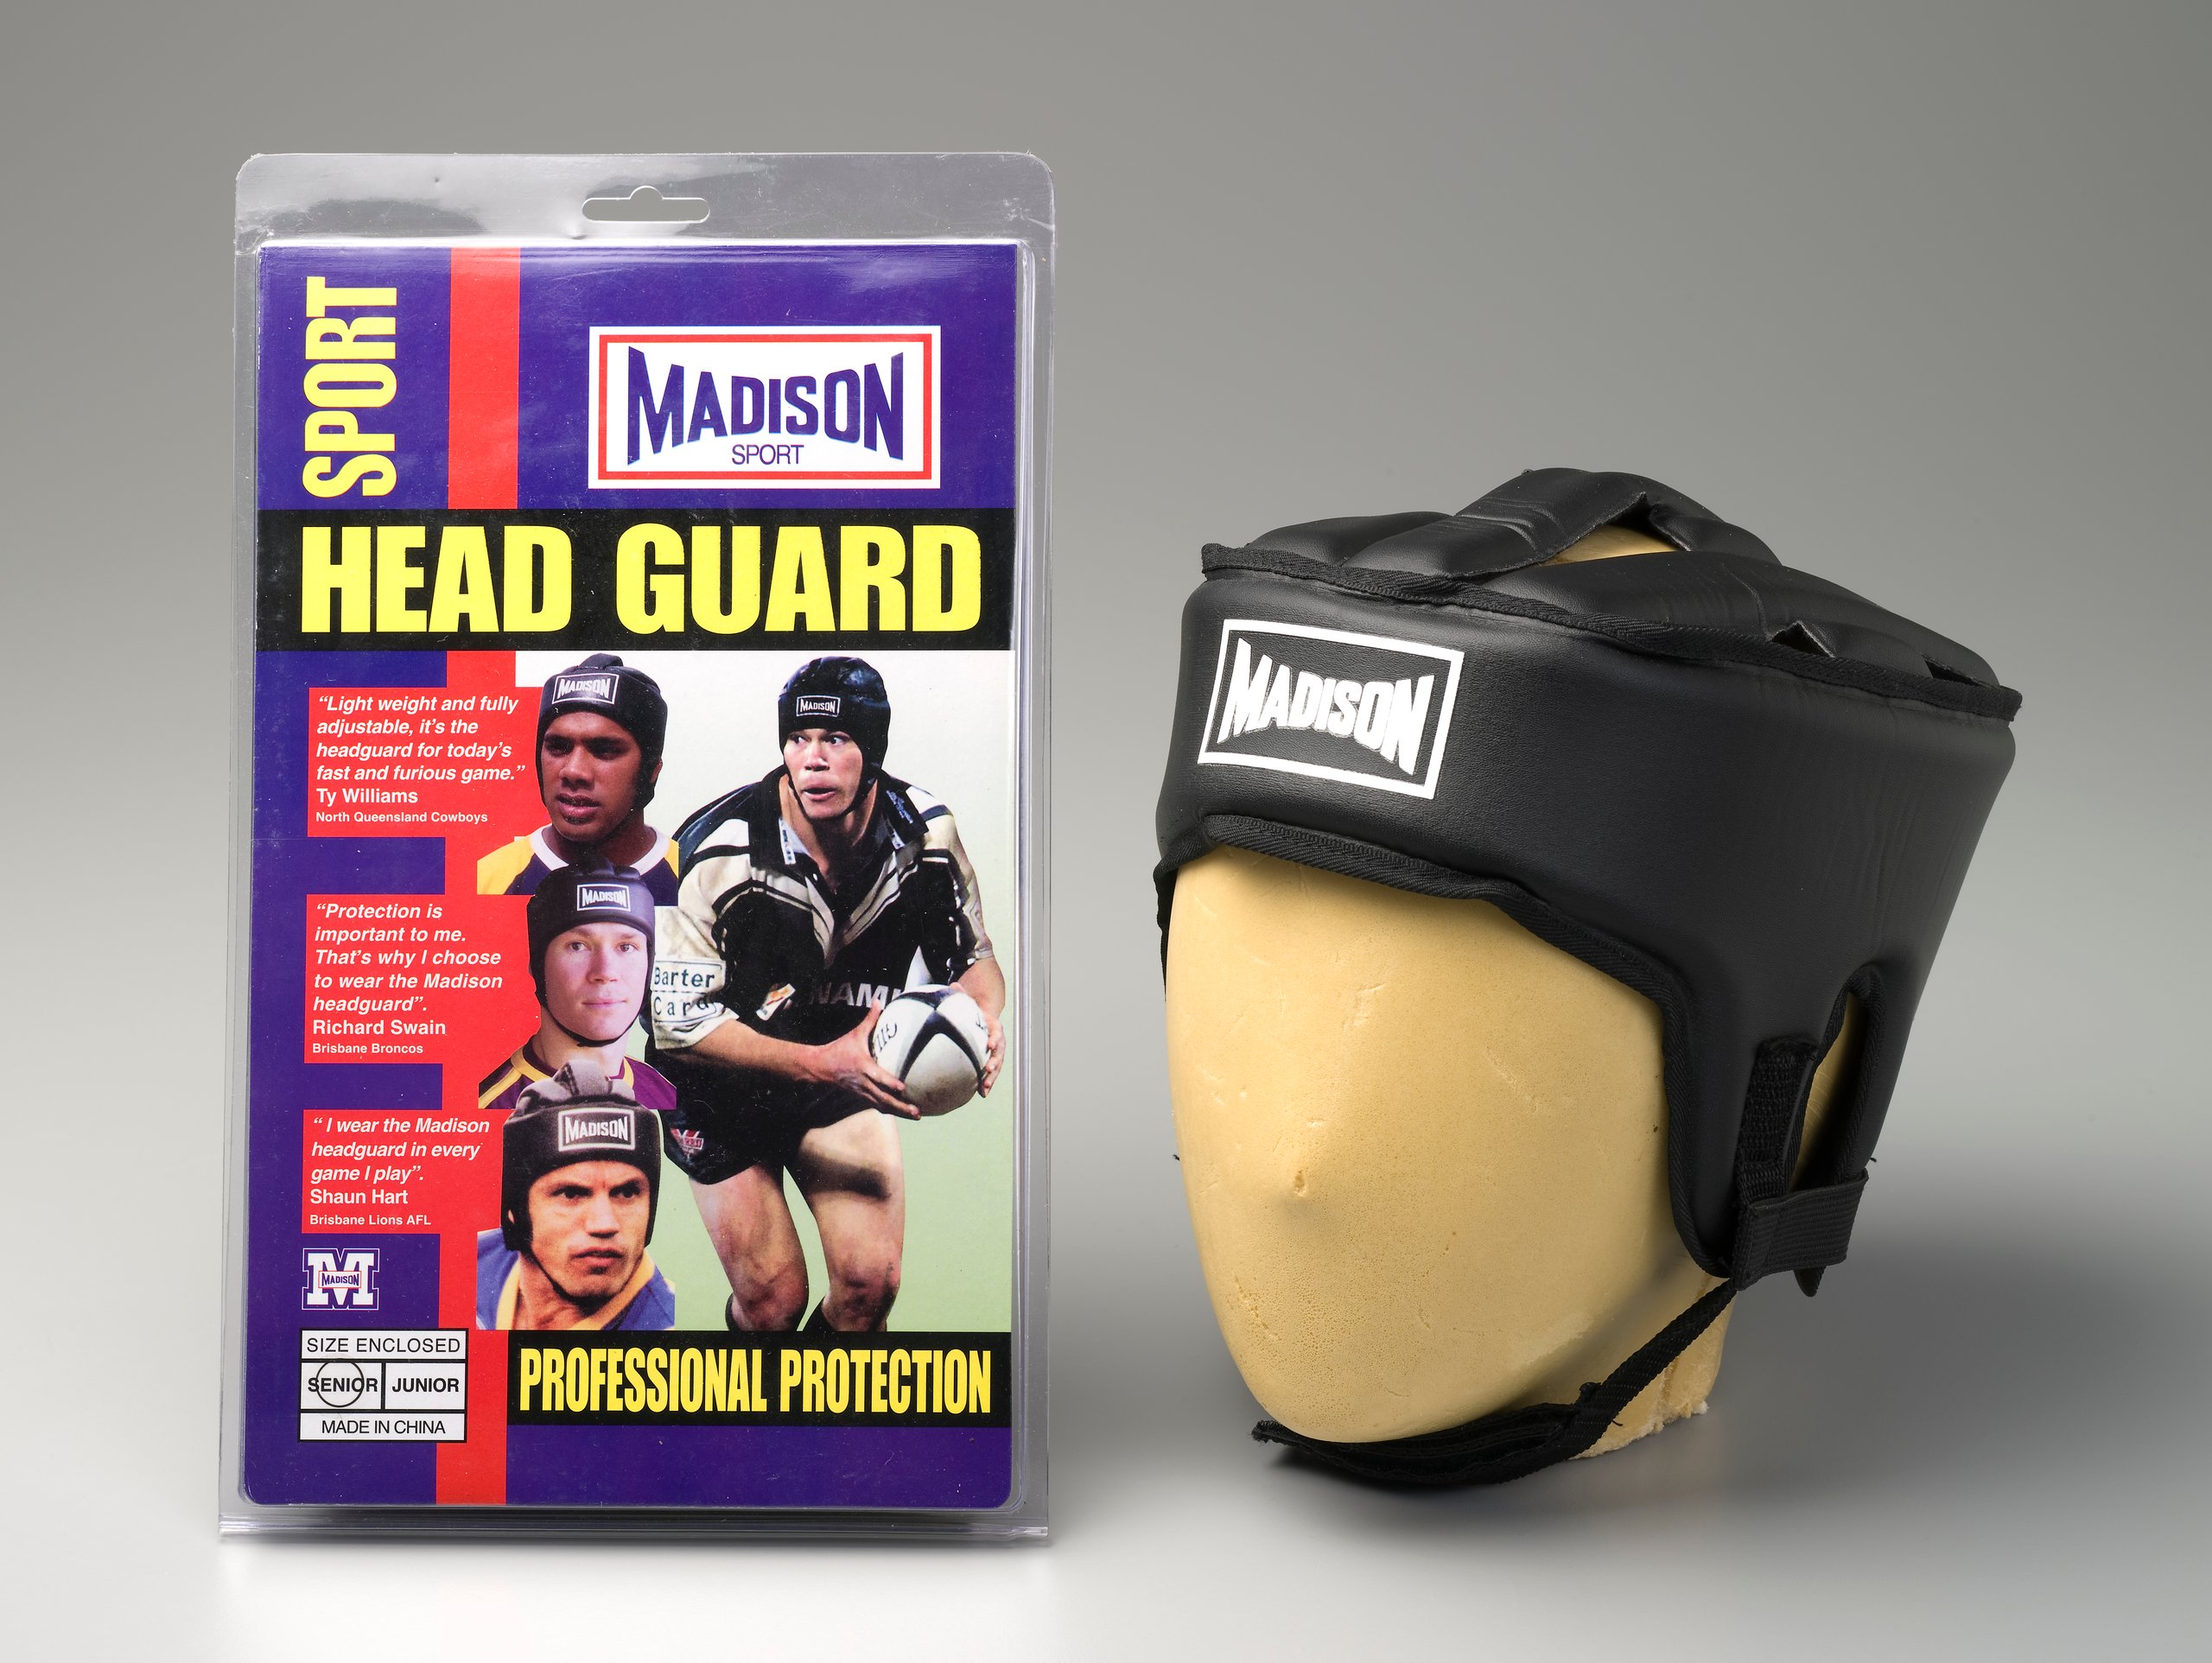 Rugby league headguard and packaging